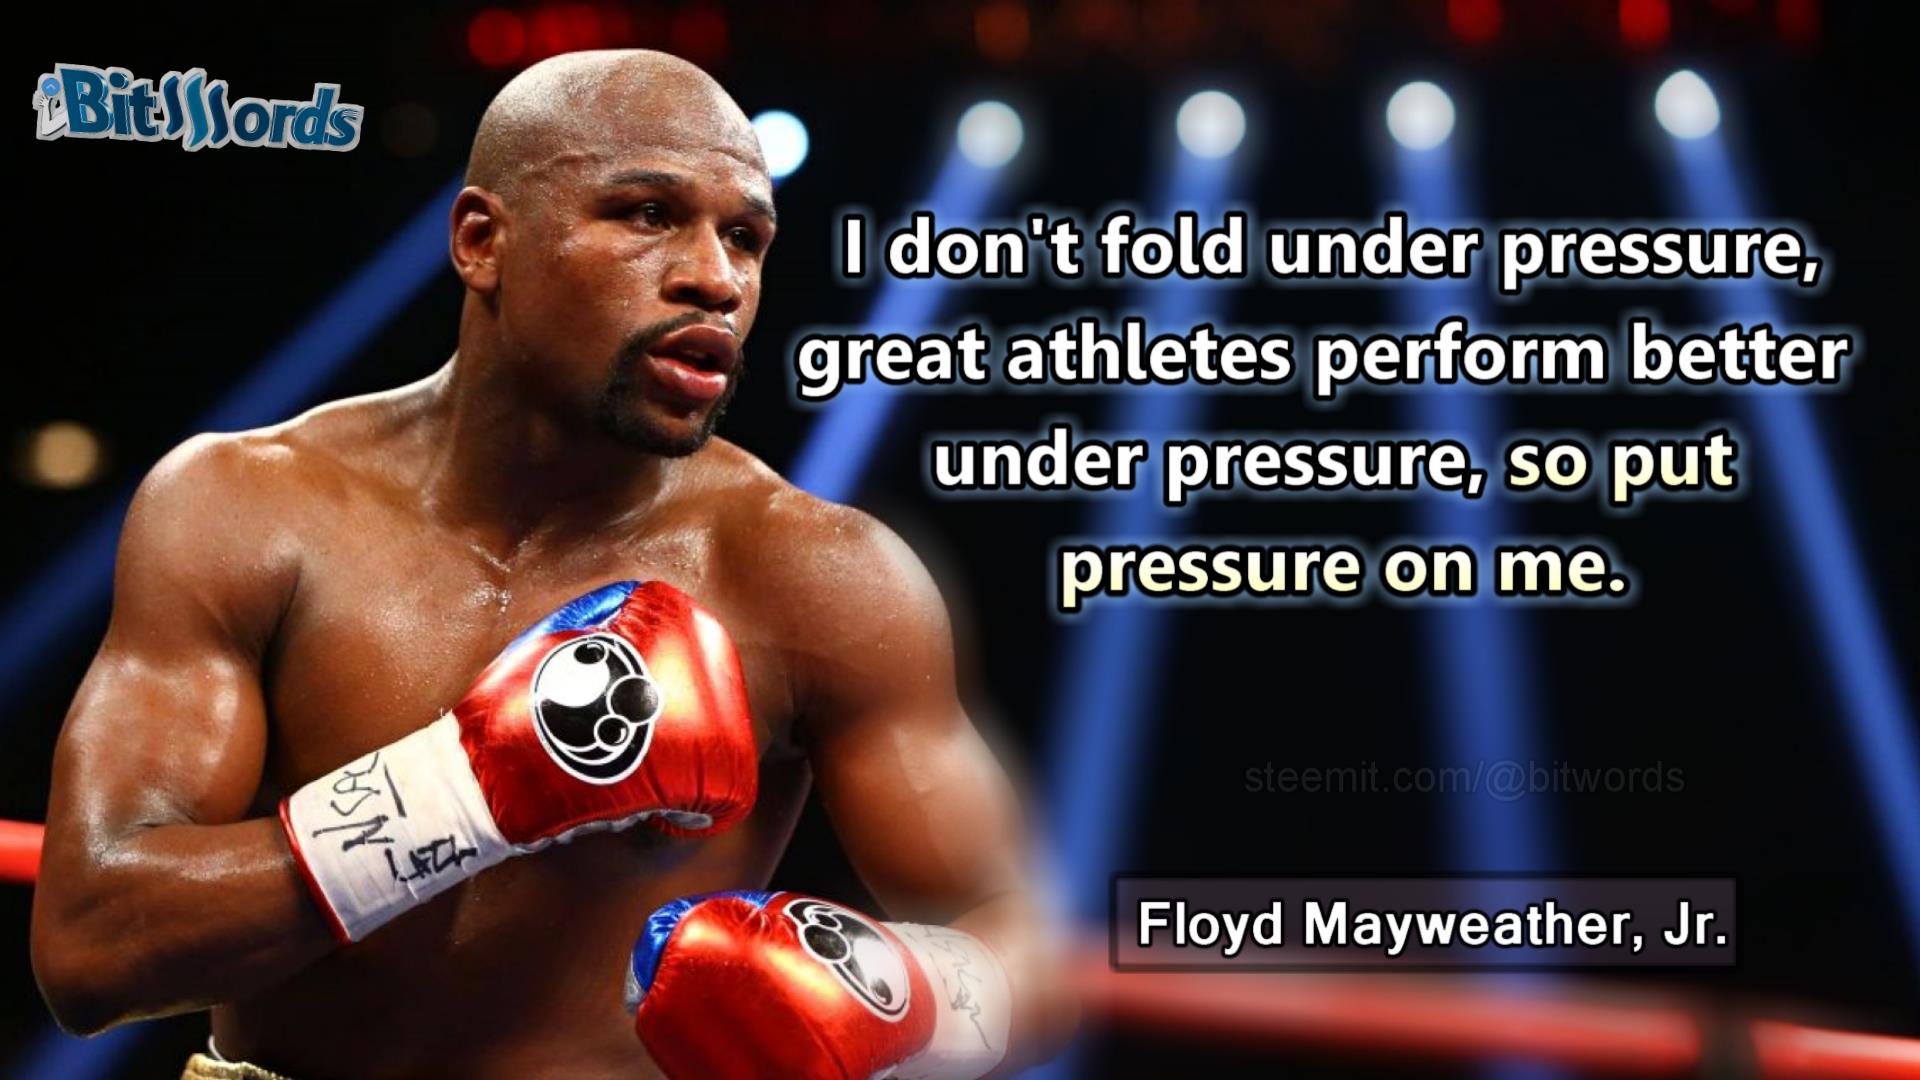 bitwords steemit sport quote of the day in dont fold under pressure great athletes perform better under presion so putim pe under floyd mayweather jr quote motivation.jpg